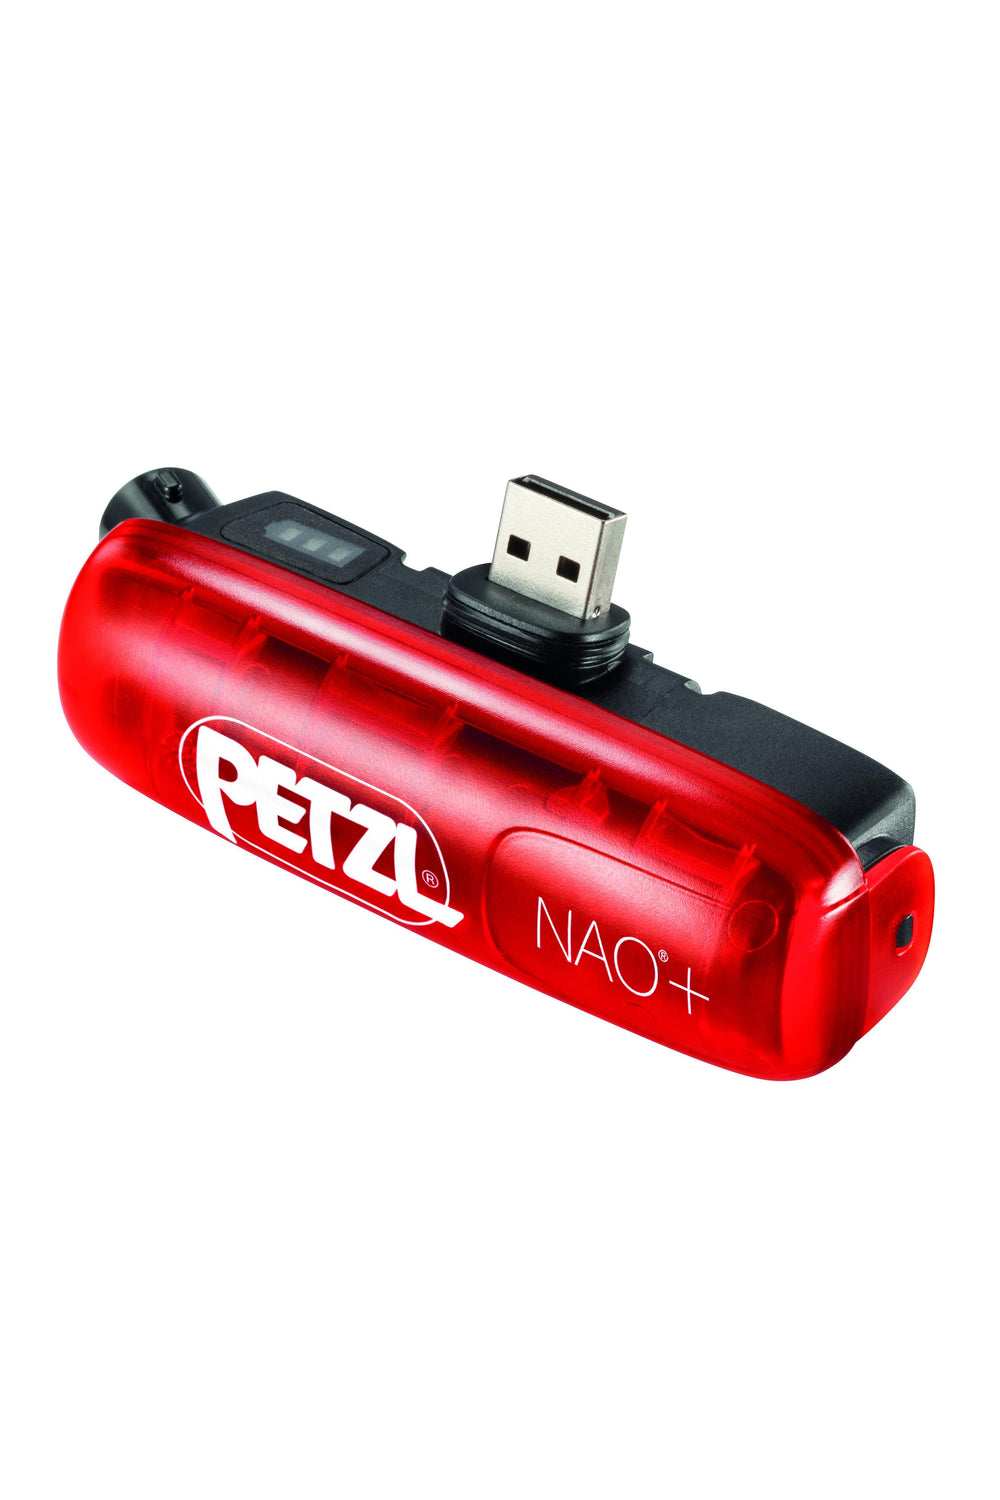 Petzl - ACCU NAO + (Spare Rechargeable Headtorch Battery)